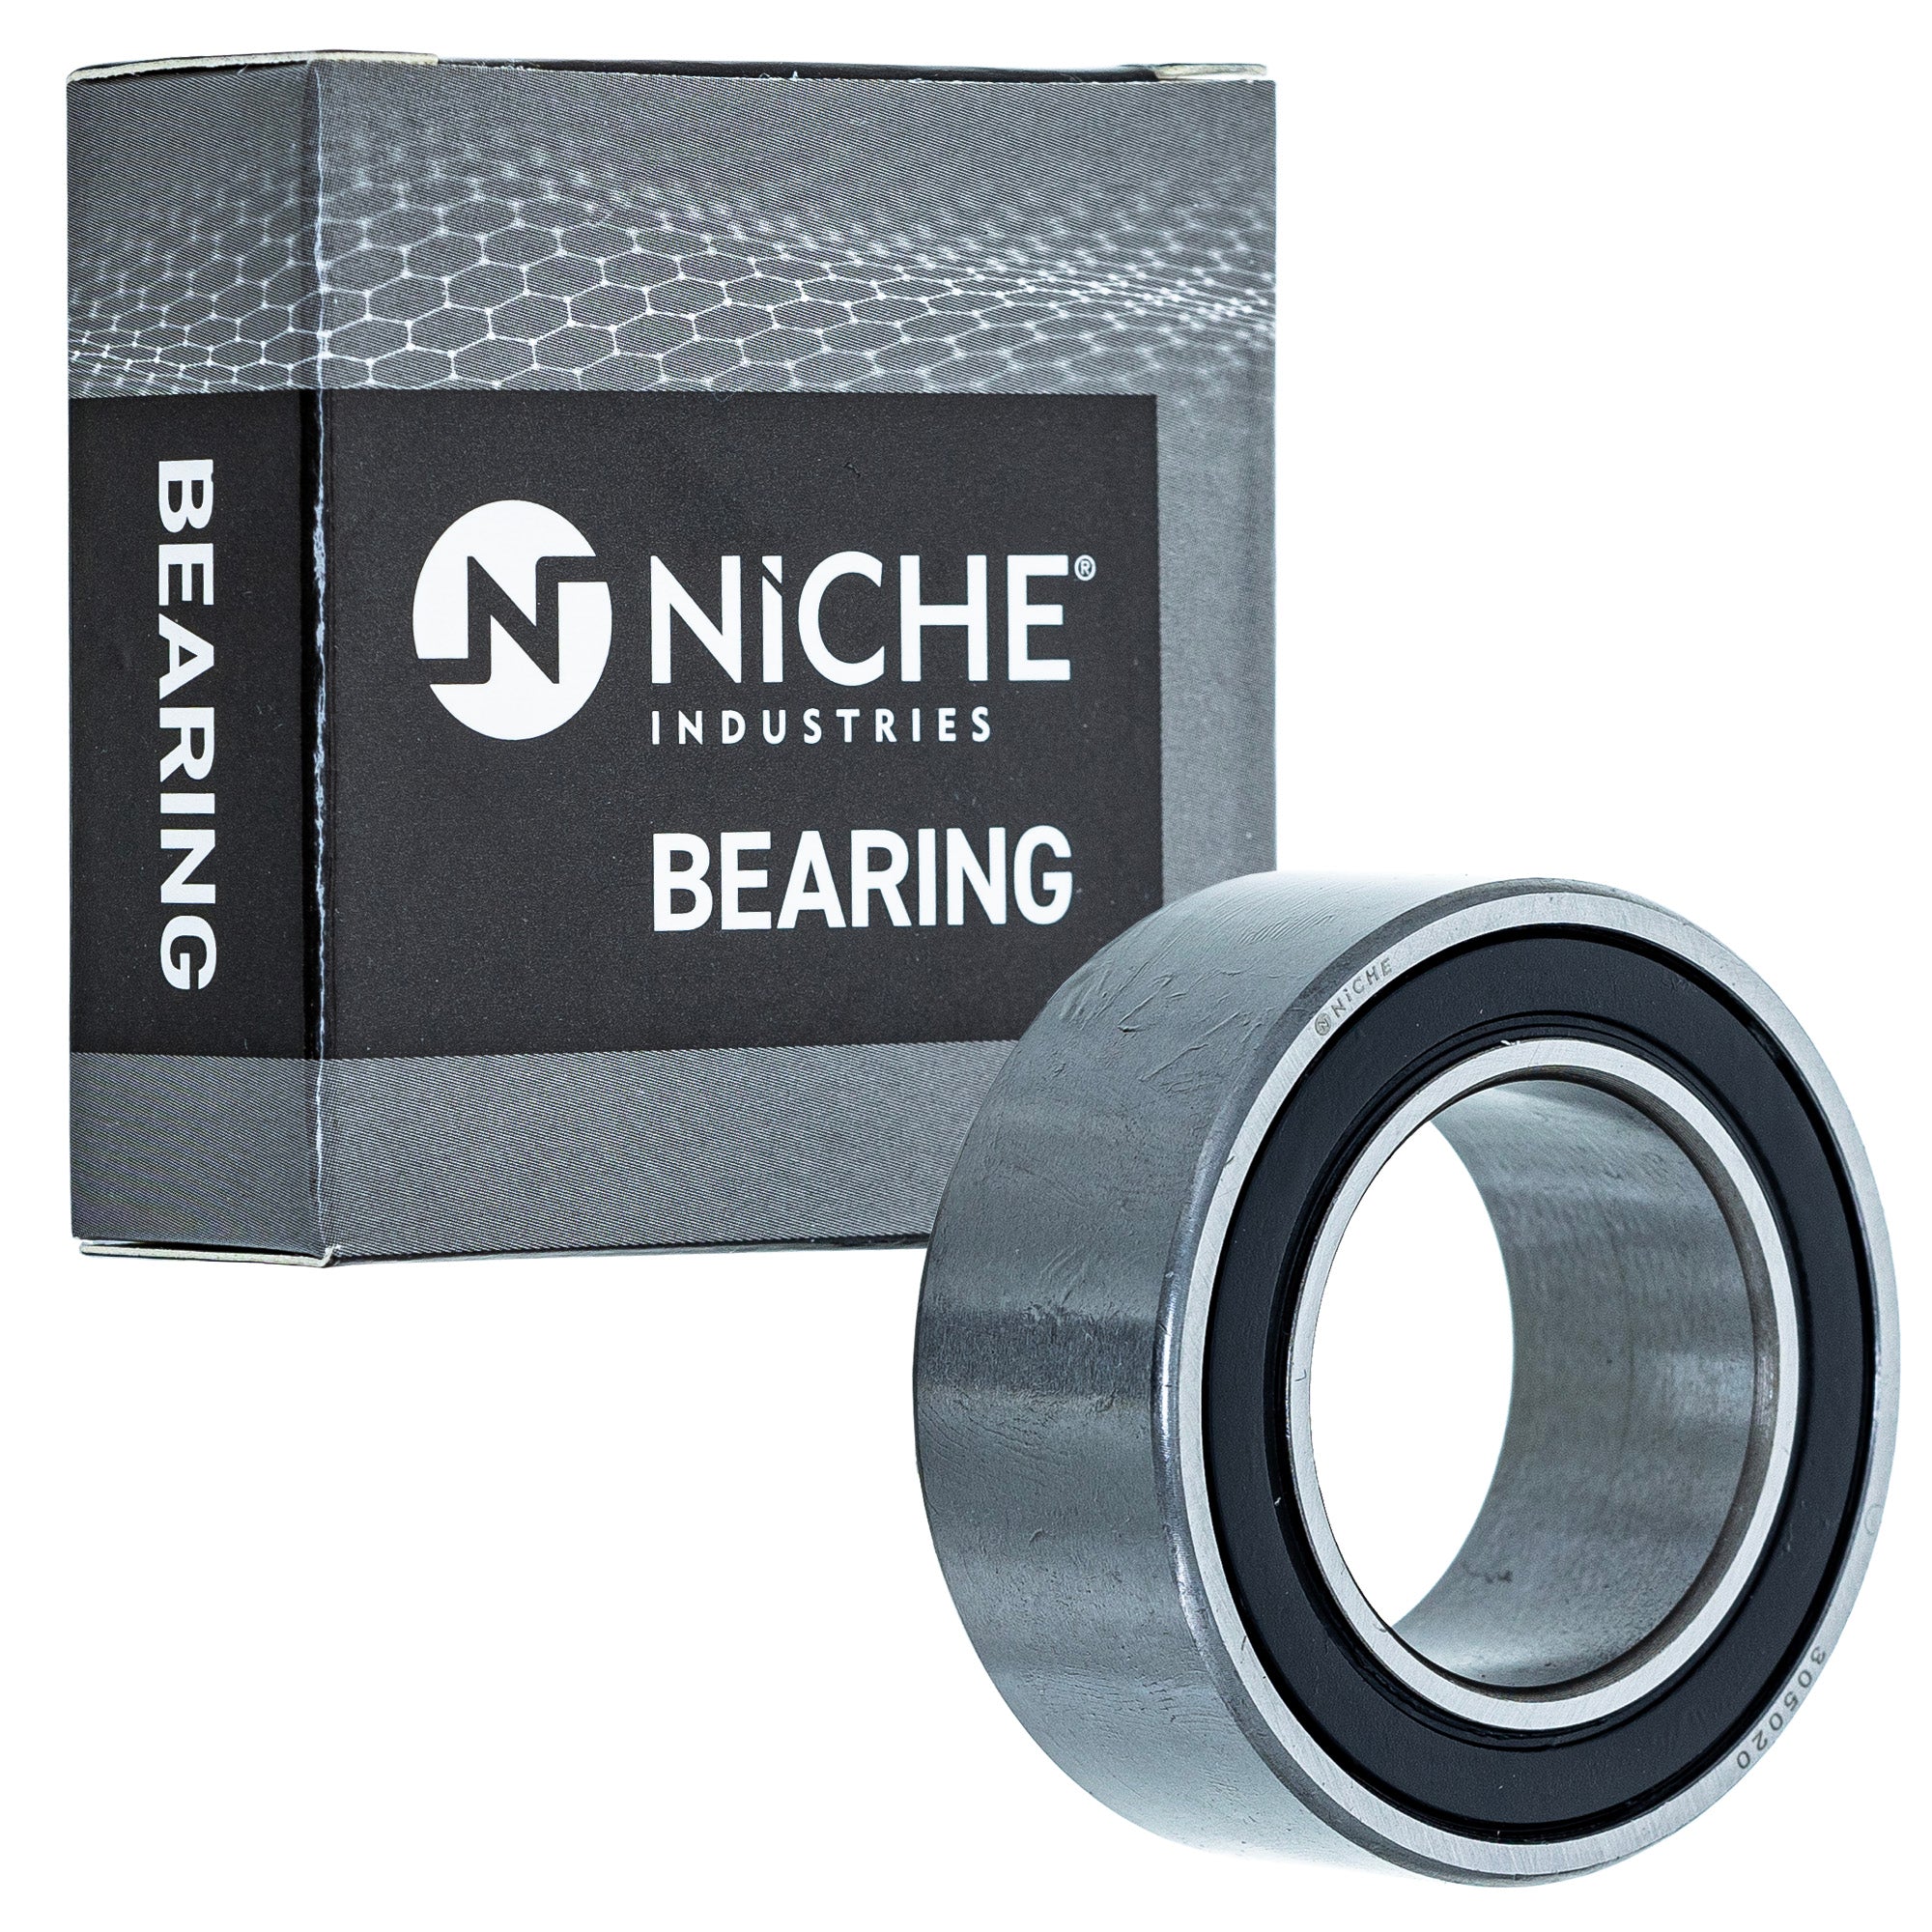 NICHE 519-CBB2241R Bearing 10-Pack for zOTHER Arctic Cat Textron